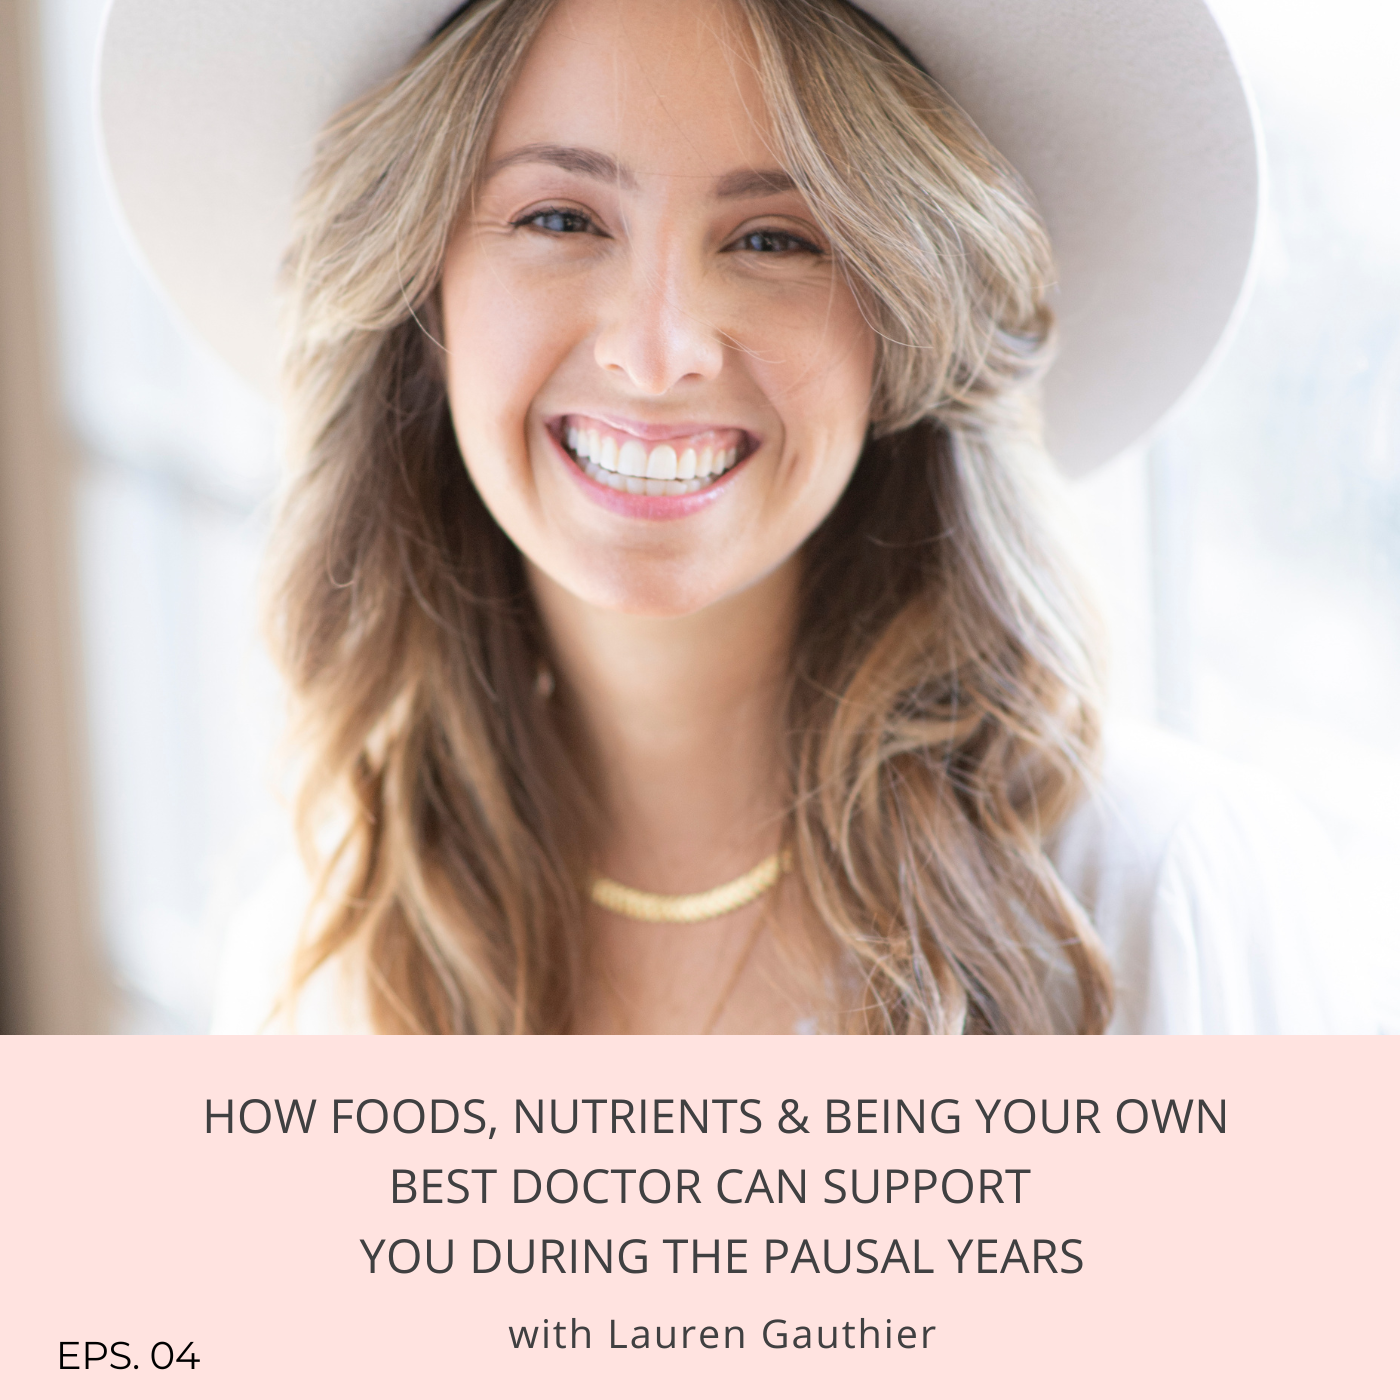 Episode 4: How foods, nutrients & being your own best doctor can support you during the pausal years with Lauren Gauthier